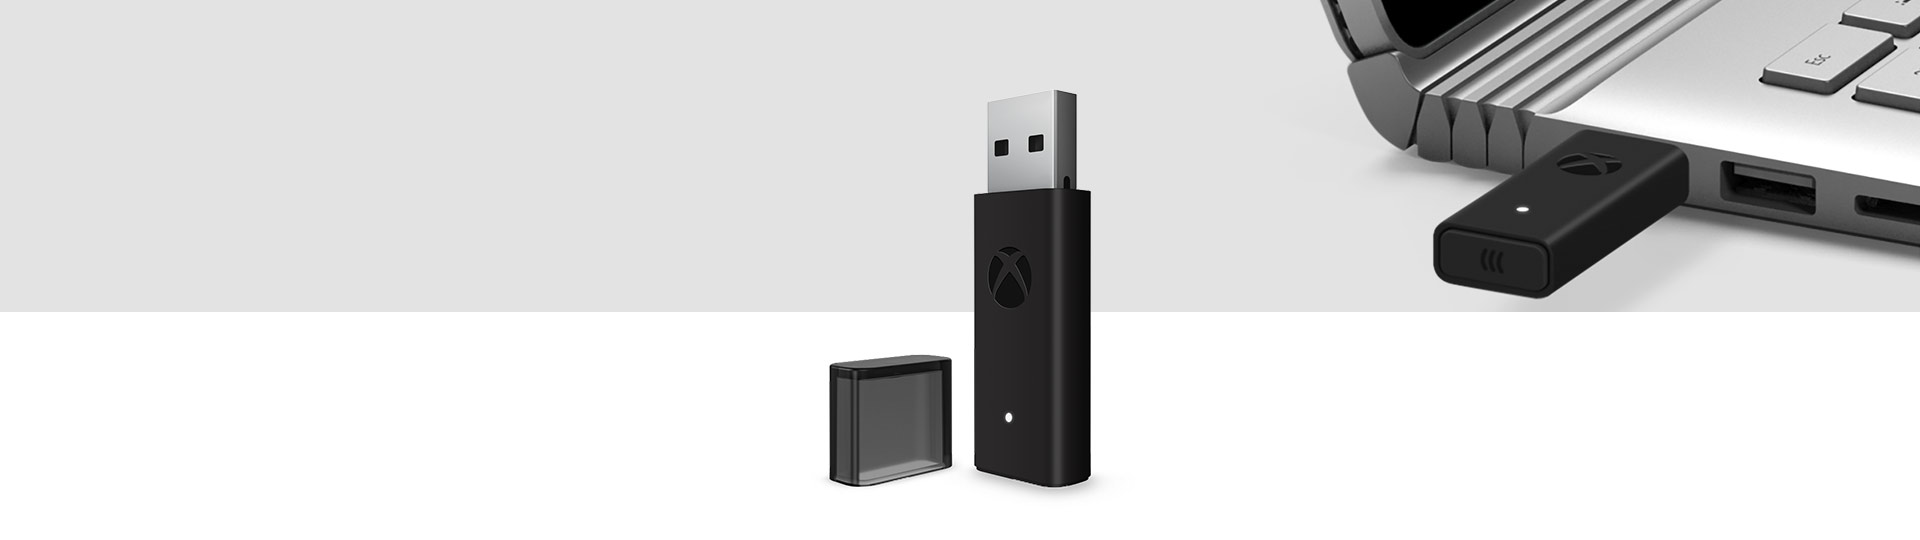 Xbox Wireless Controller Adapter for Windows 10 with Xbox Wireless Adapter plugged into a USB port on a laptop in the background